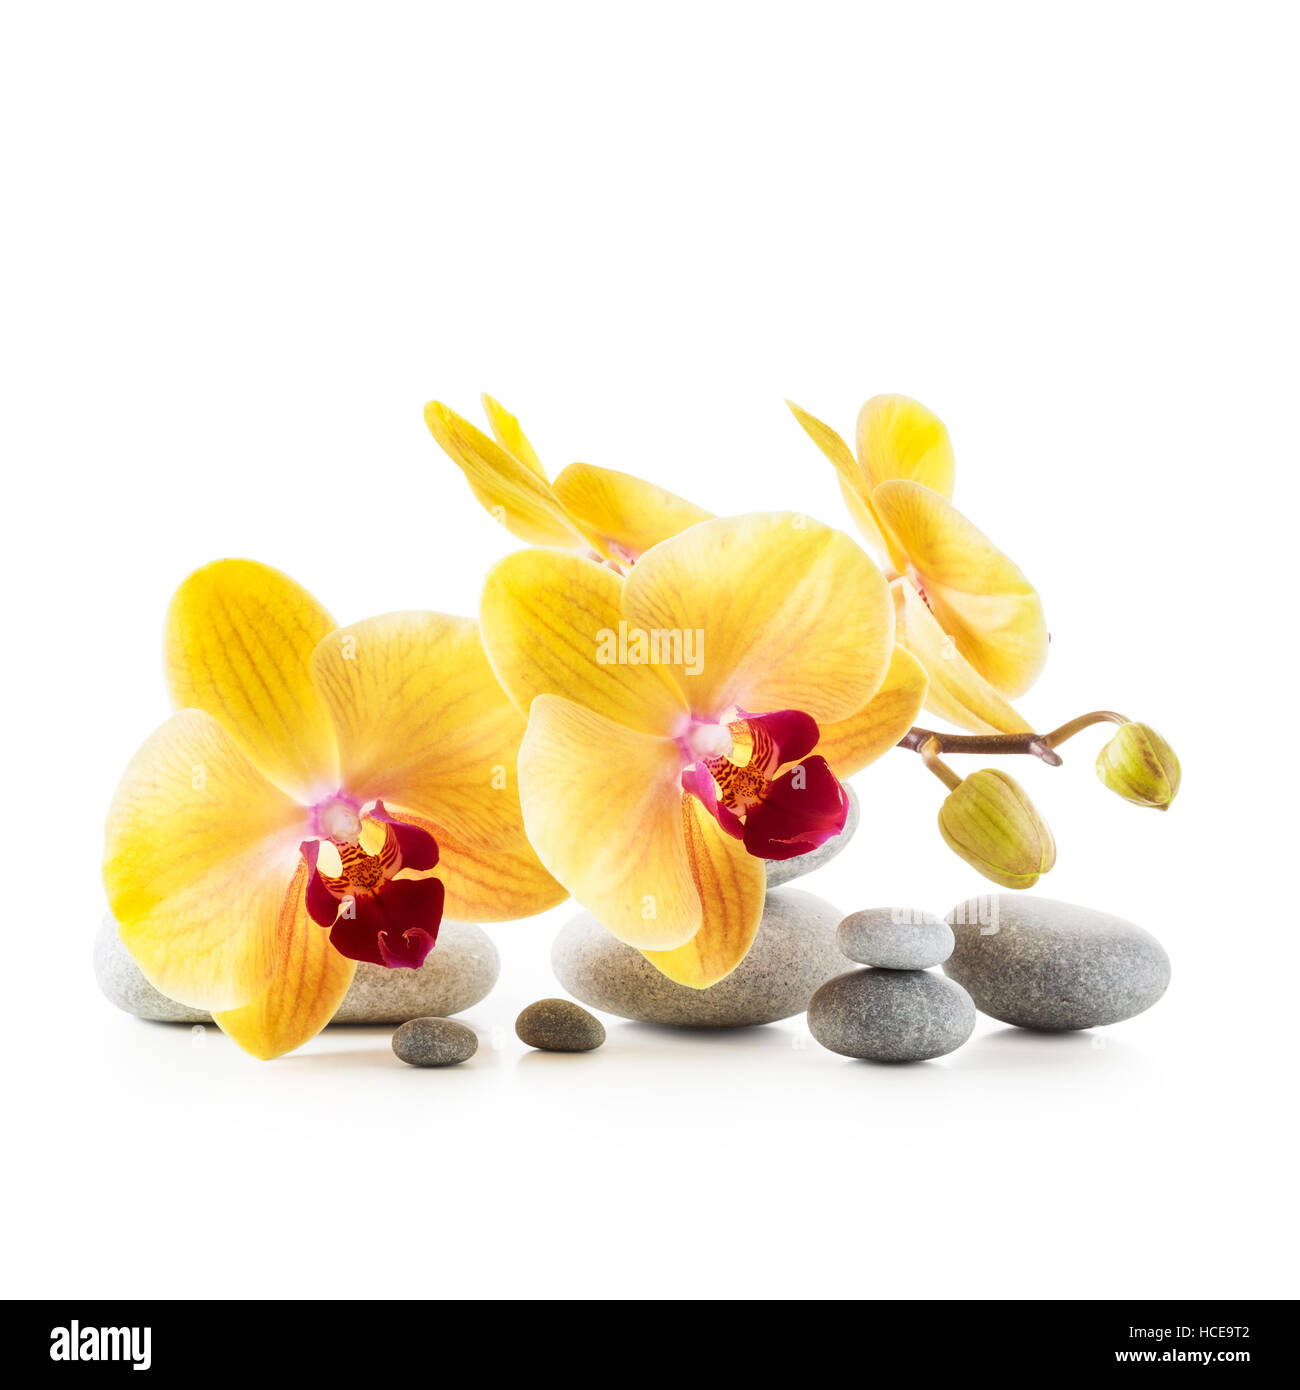 Yellow orchid flowers and spa stones isolated on white background clipping path included Stock Photo